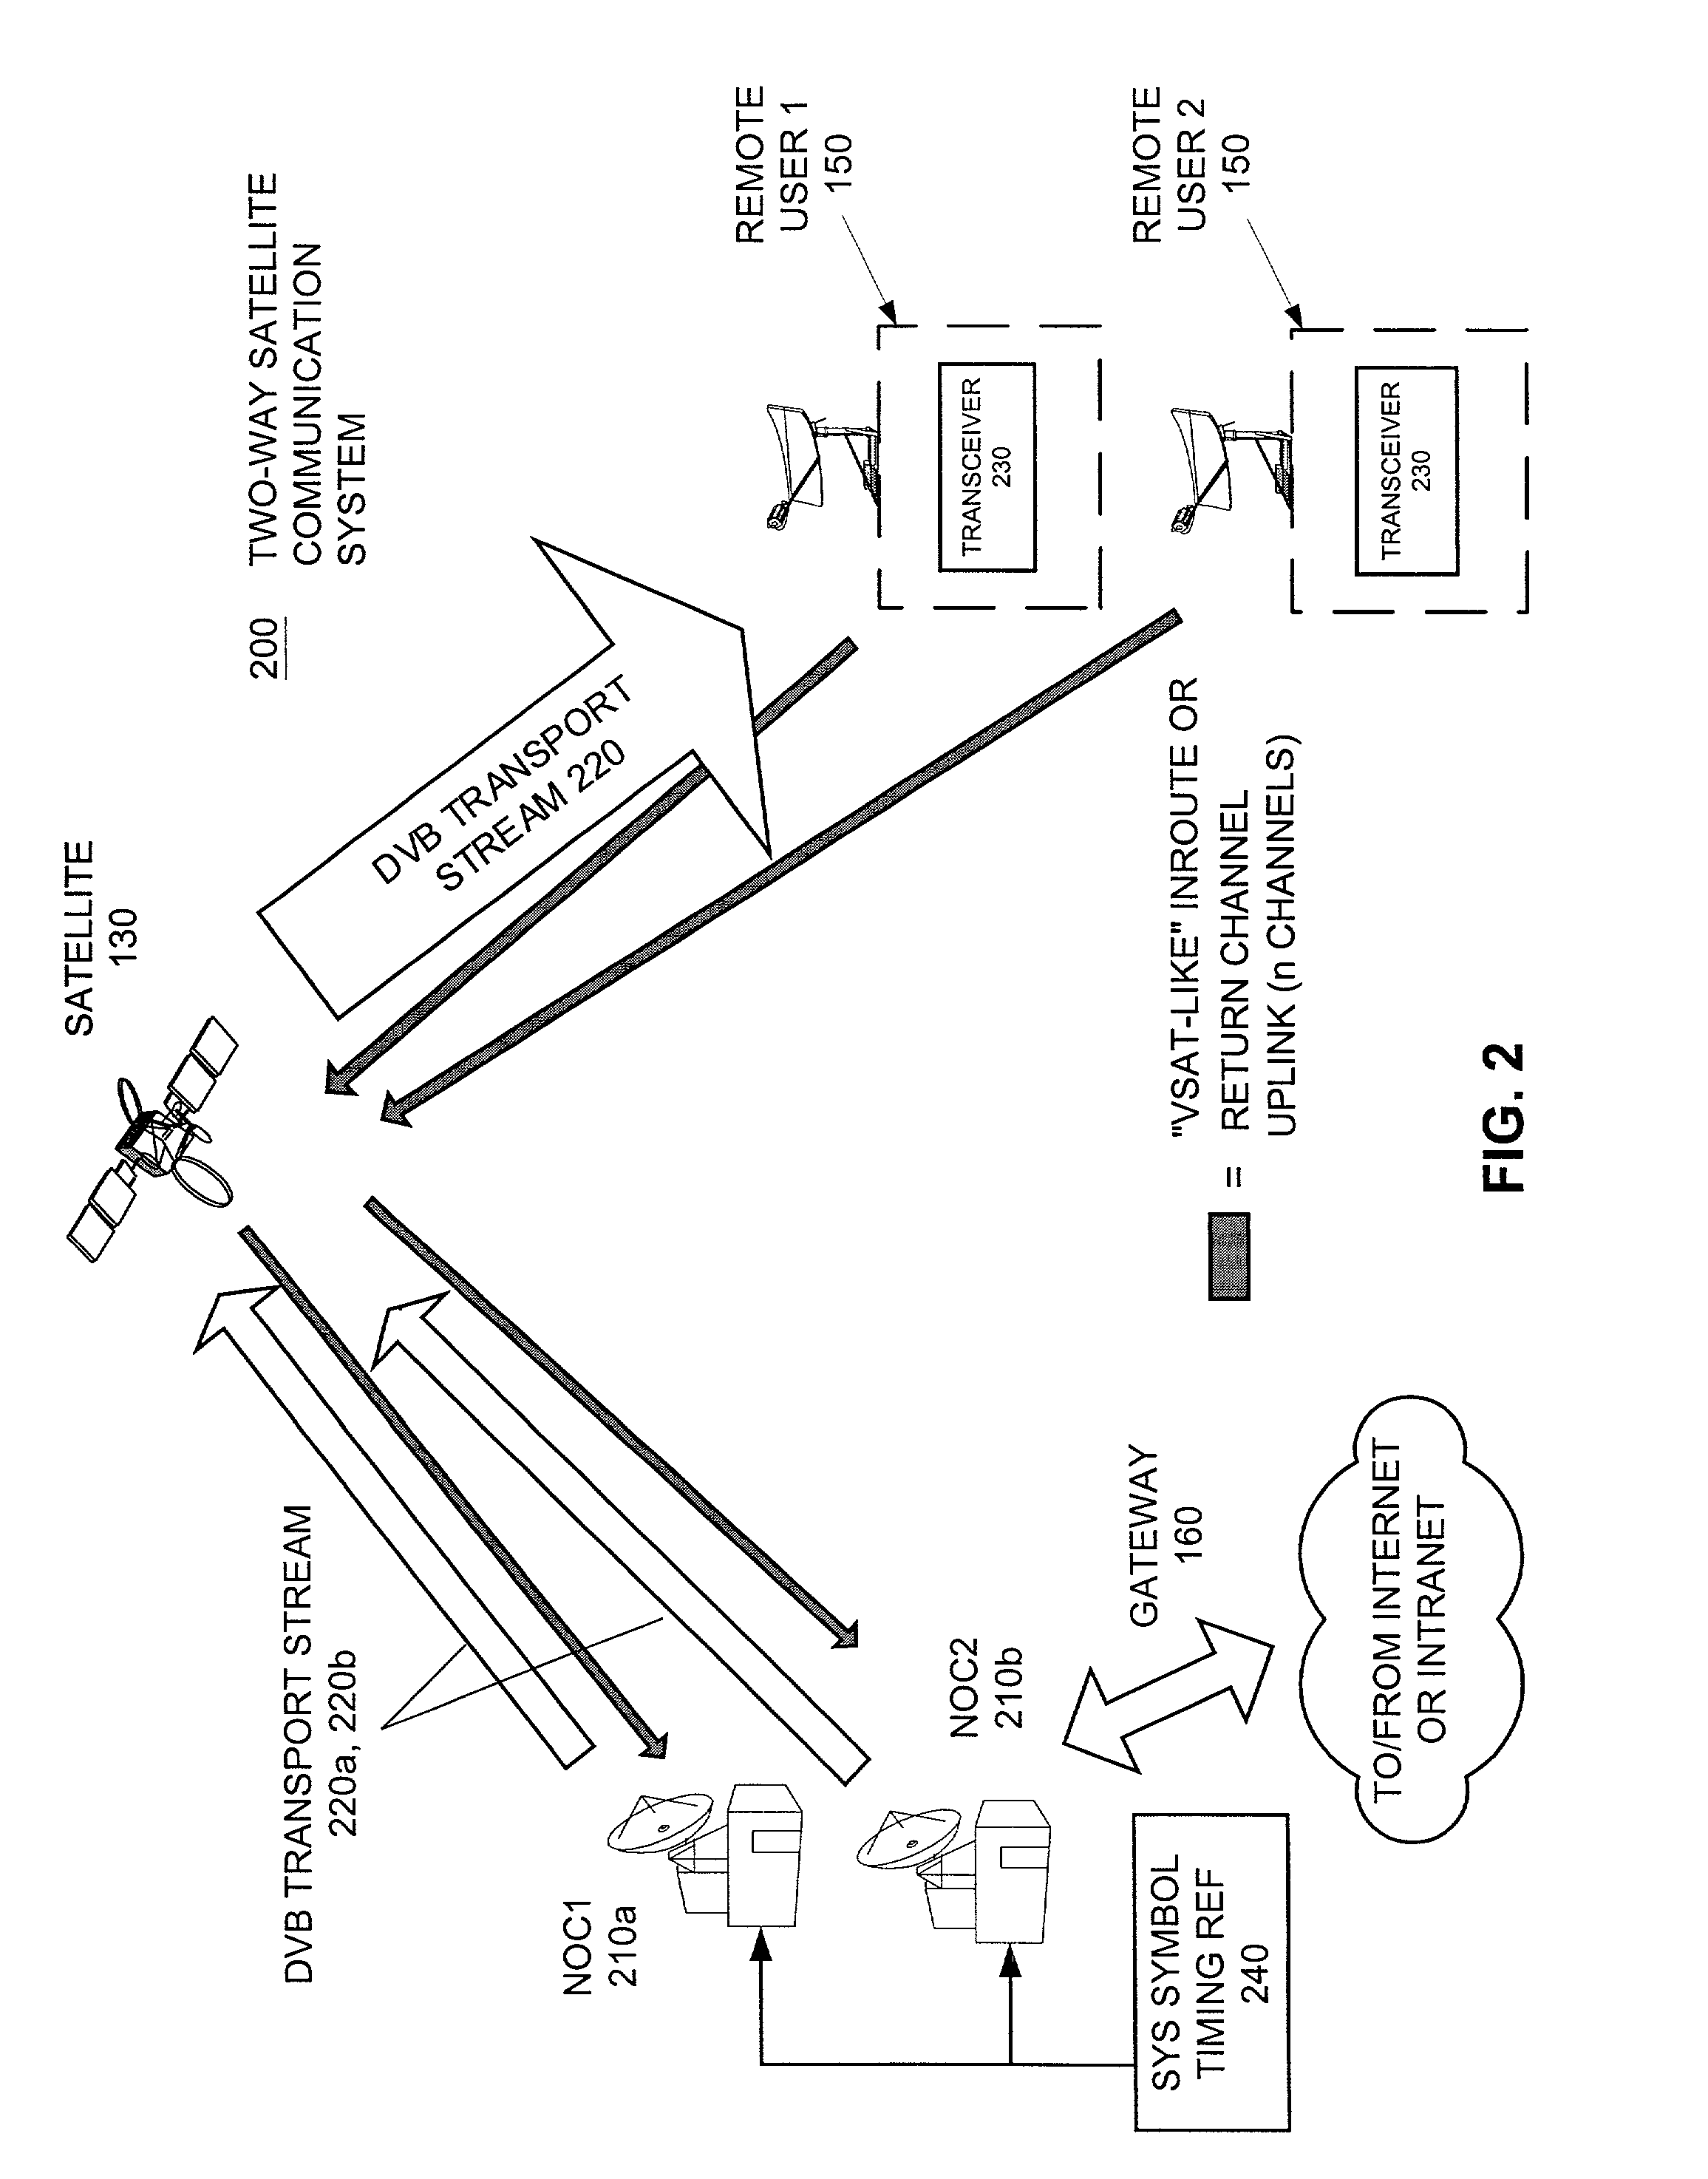 Method and apparatus for deriving uplink timing from asynchronous traffic across multiple transport streams